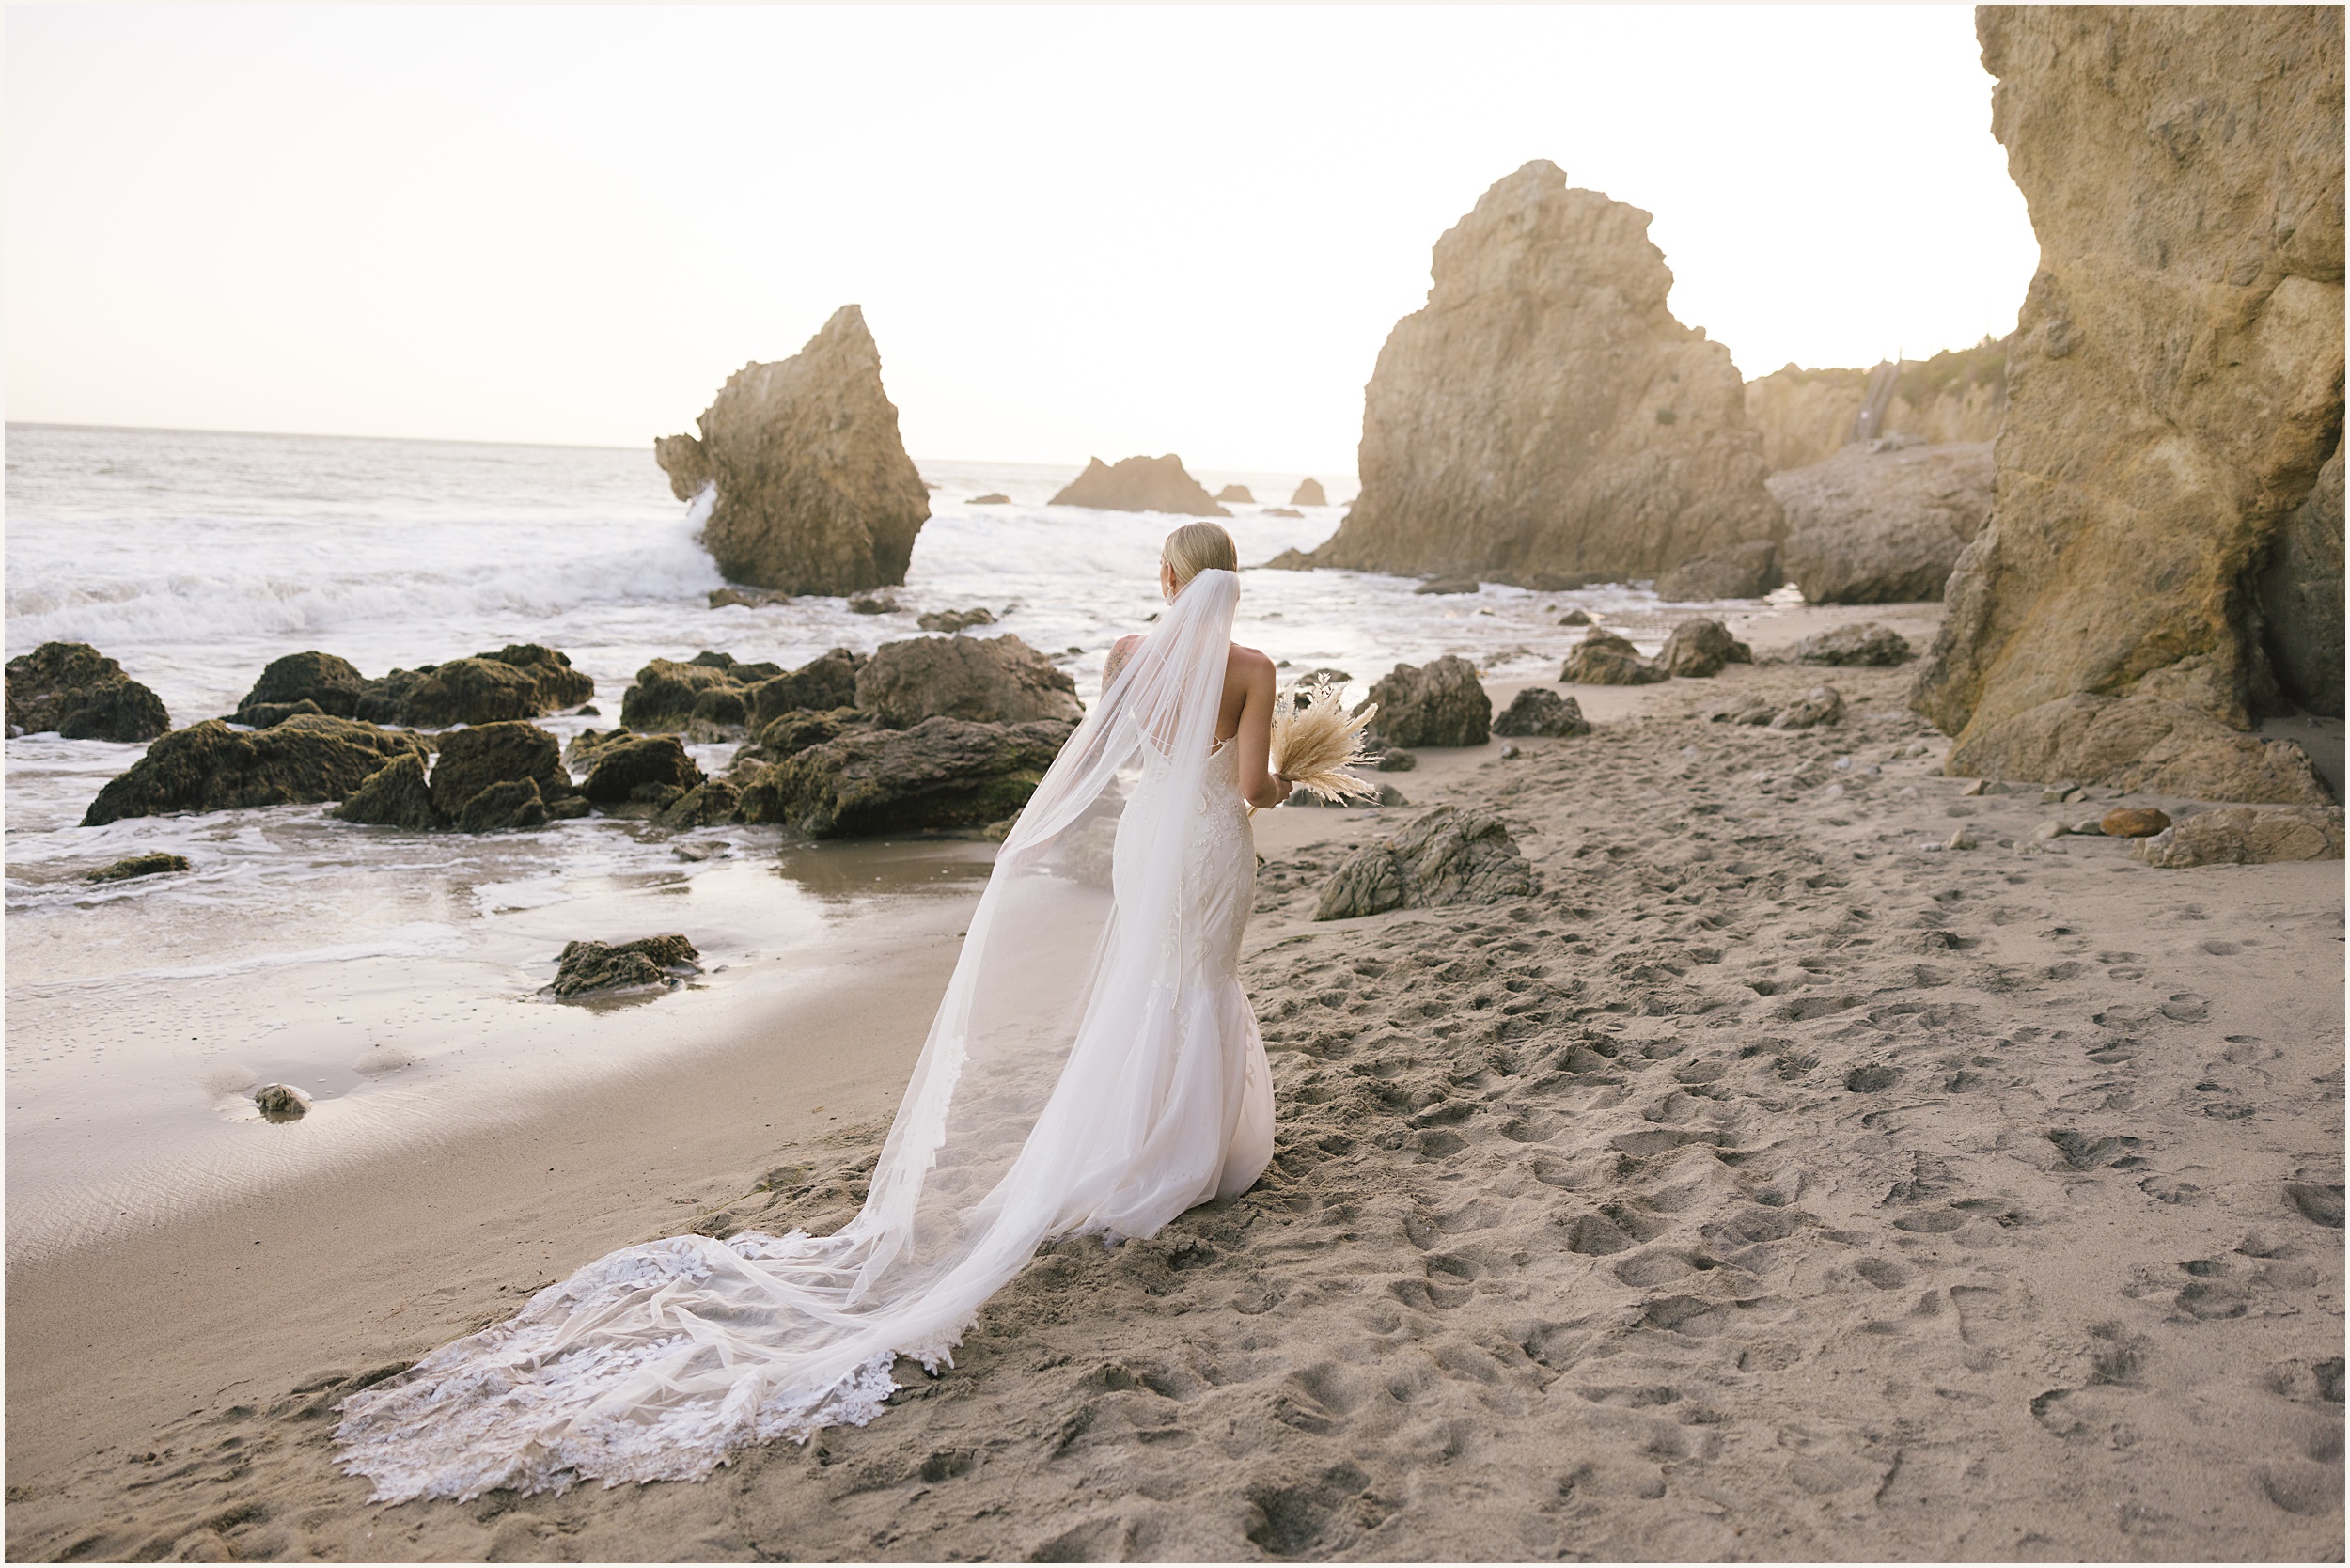 Kylie-and-Anthony-137 Dreamy Malibu Elopement With A Beach Picnic // Kylie & Anthony